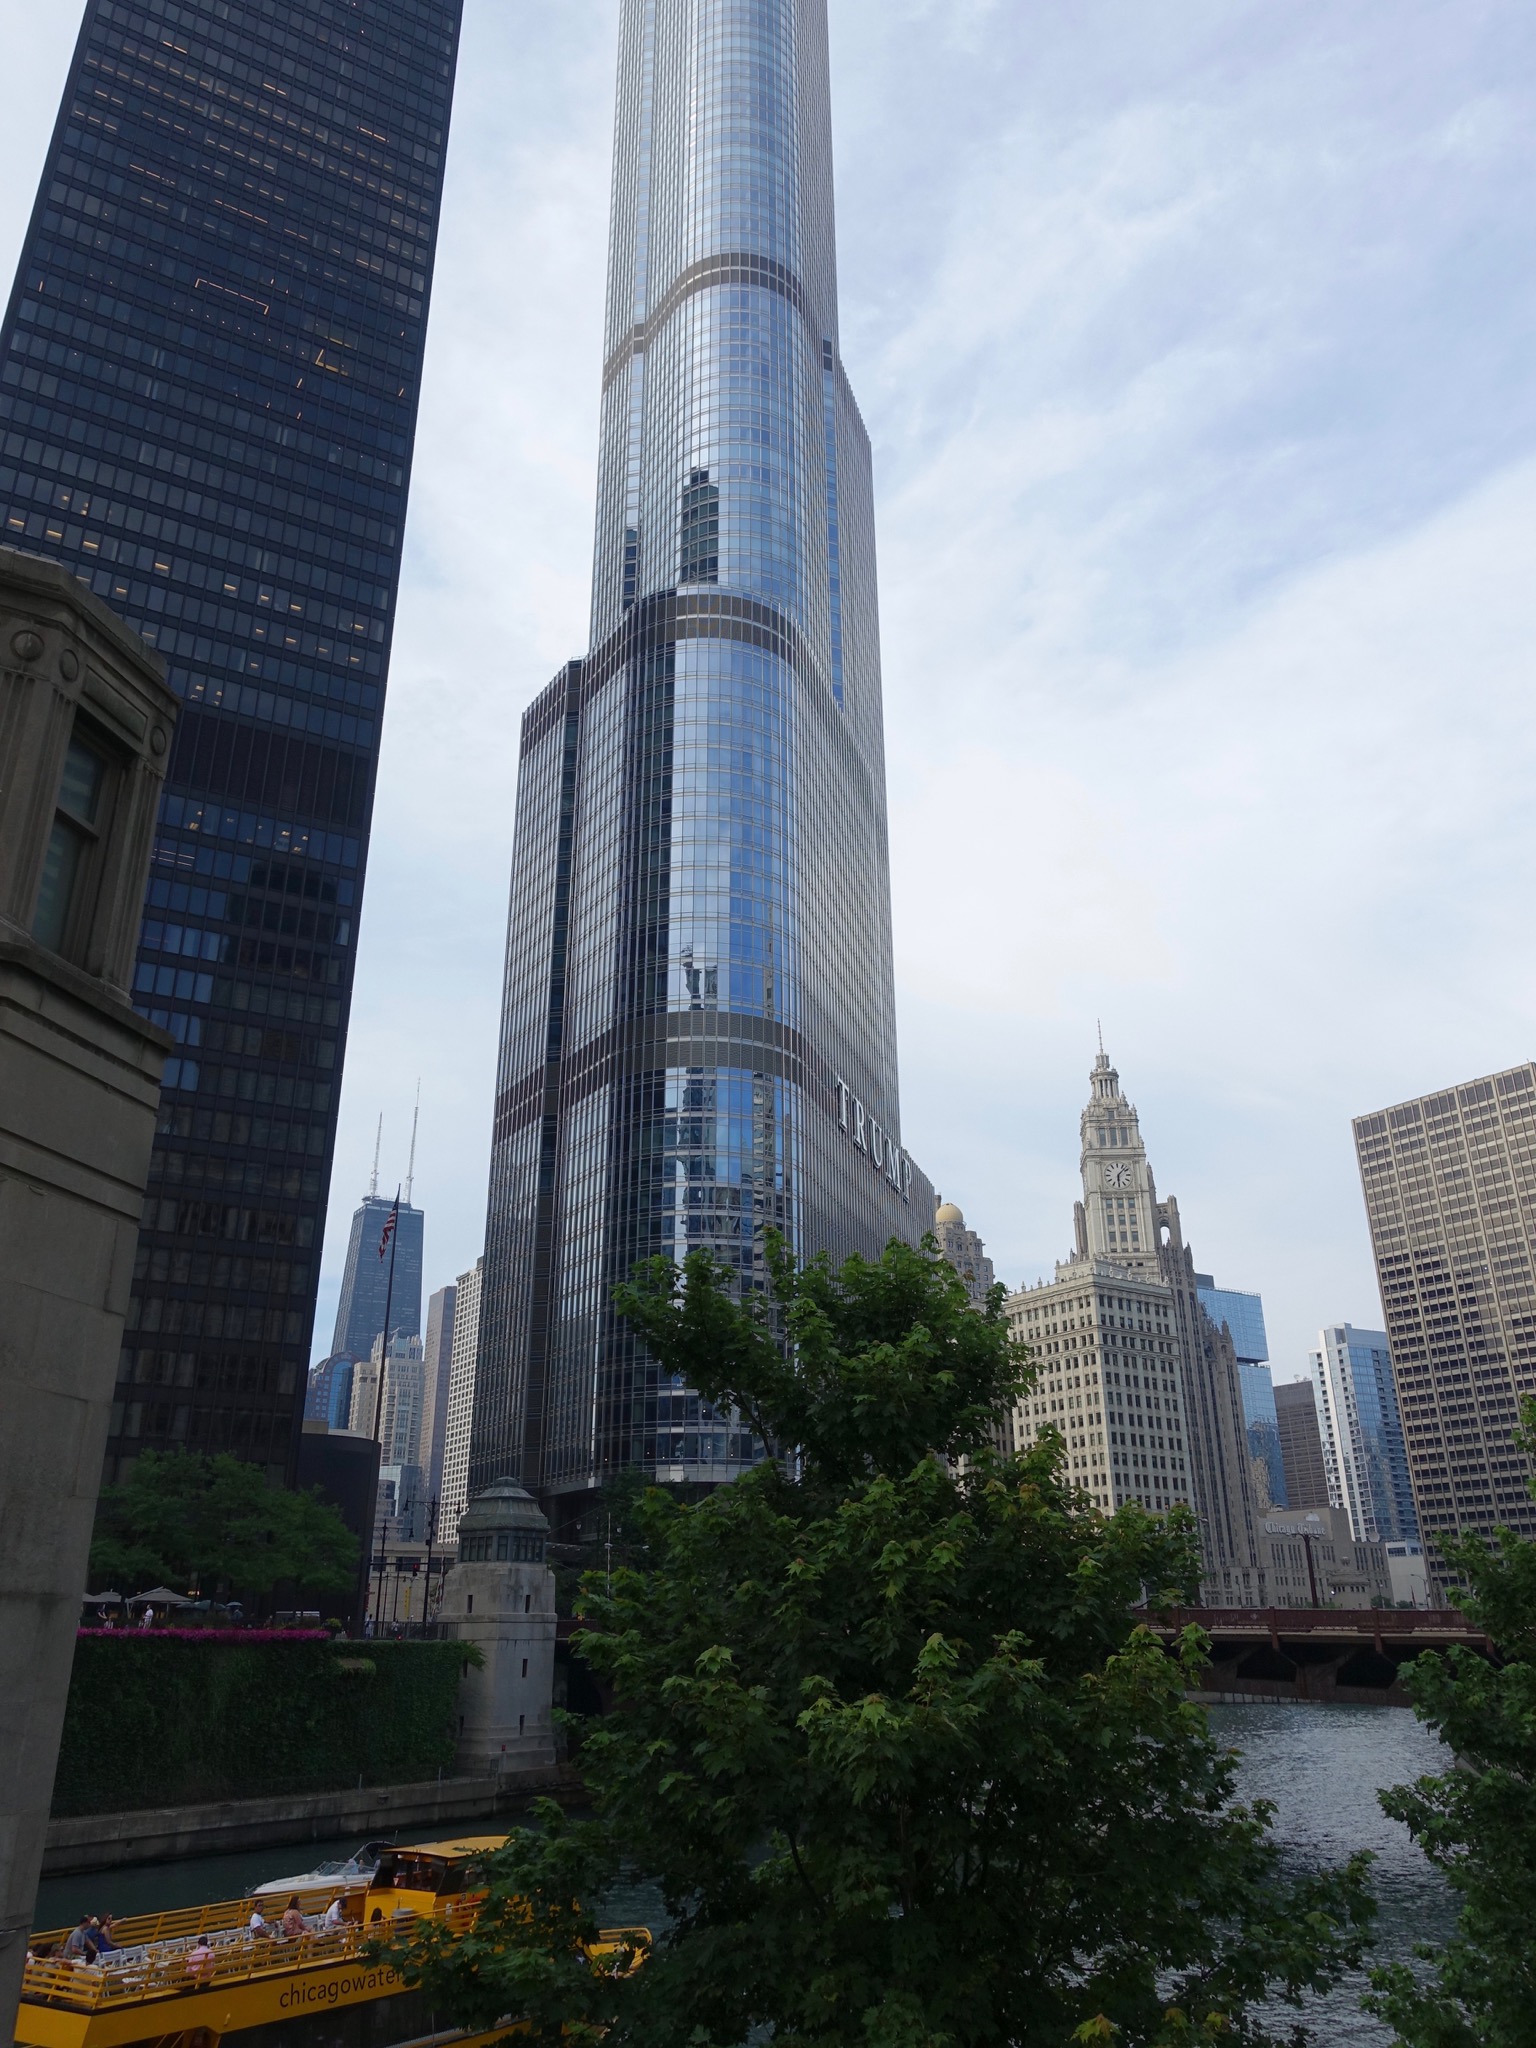 Photo 82 of 135 from the album Highlights Chicago 2015.